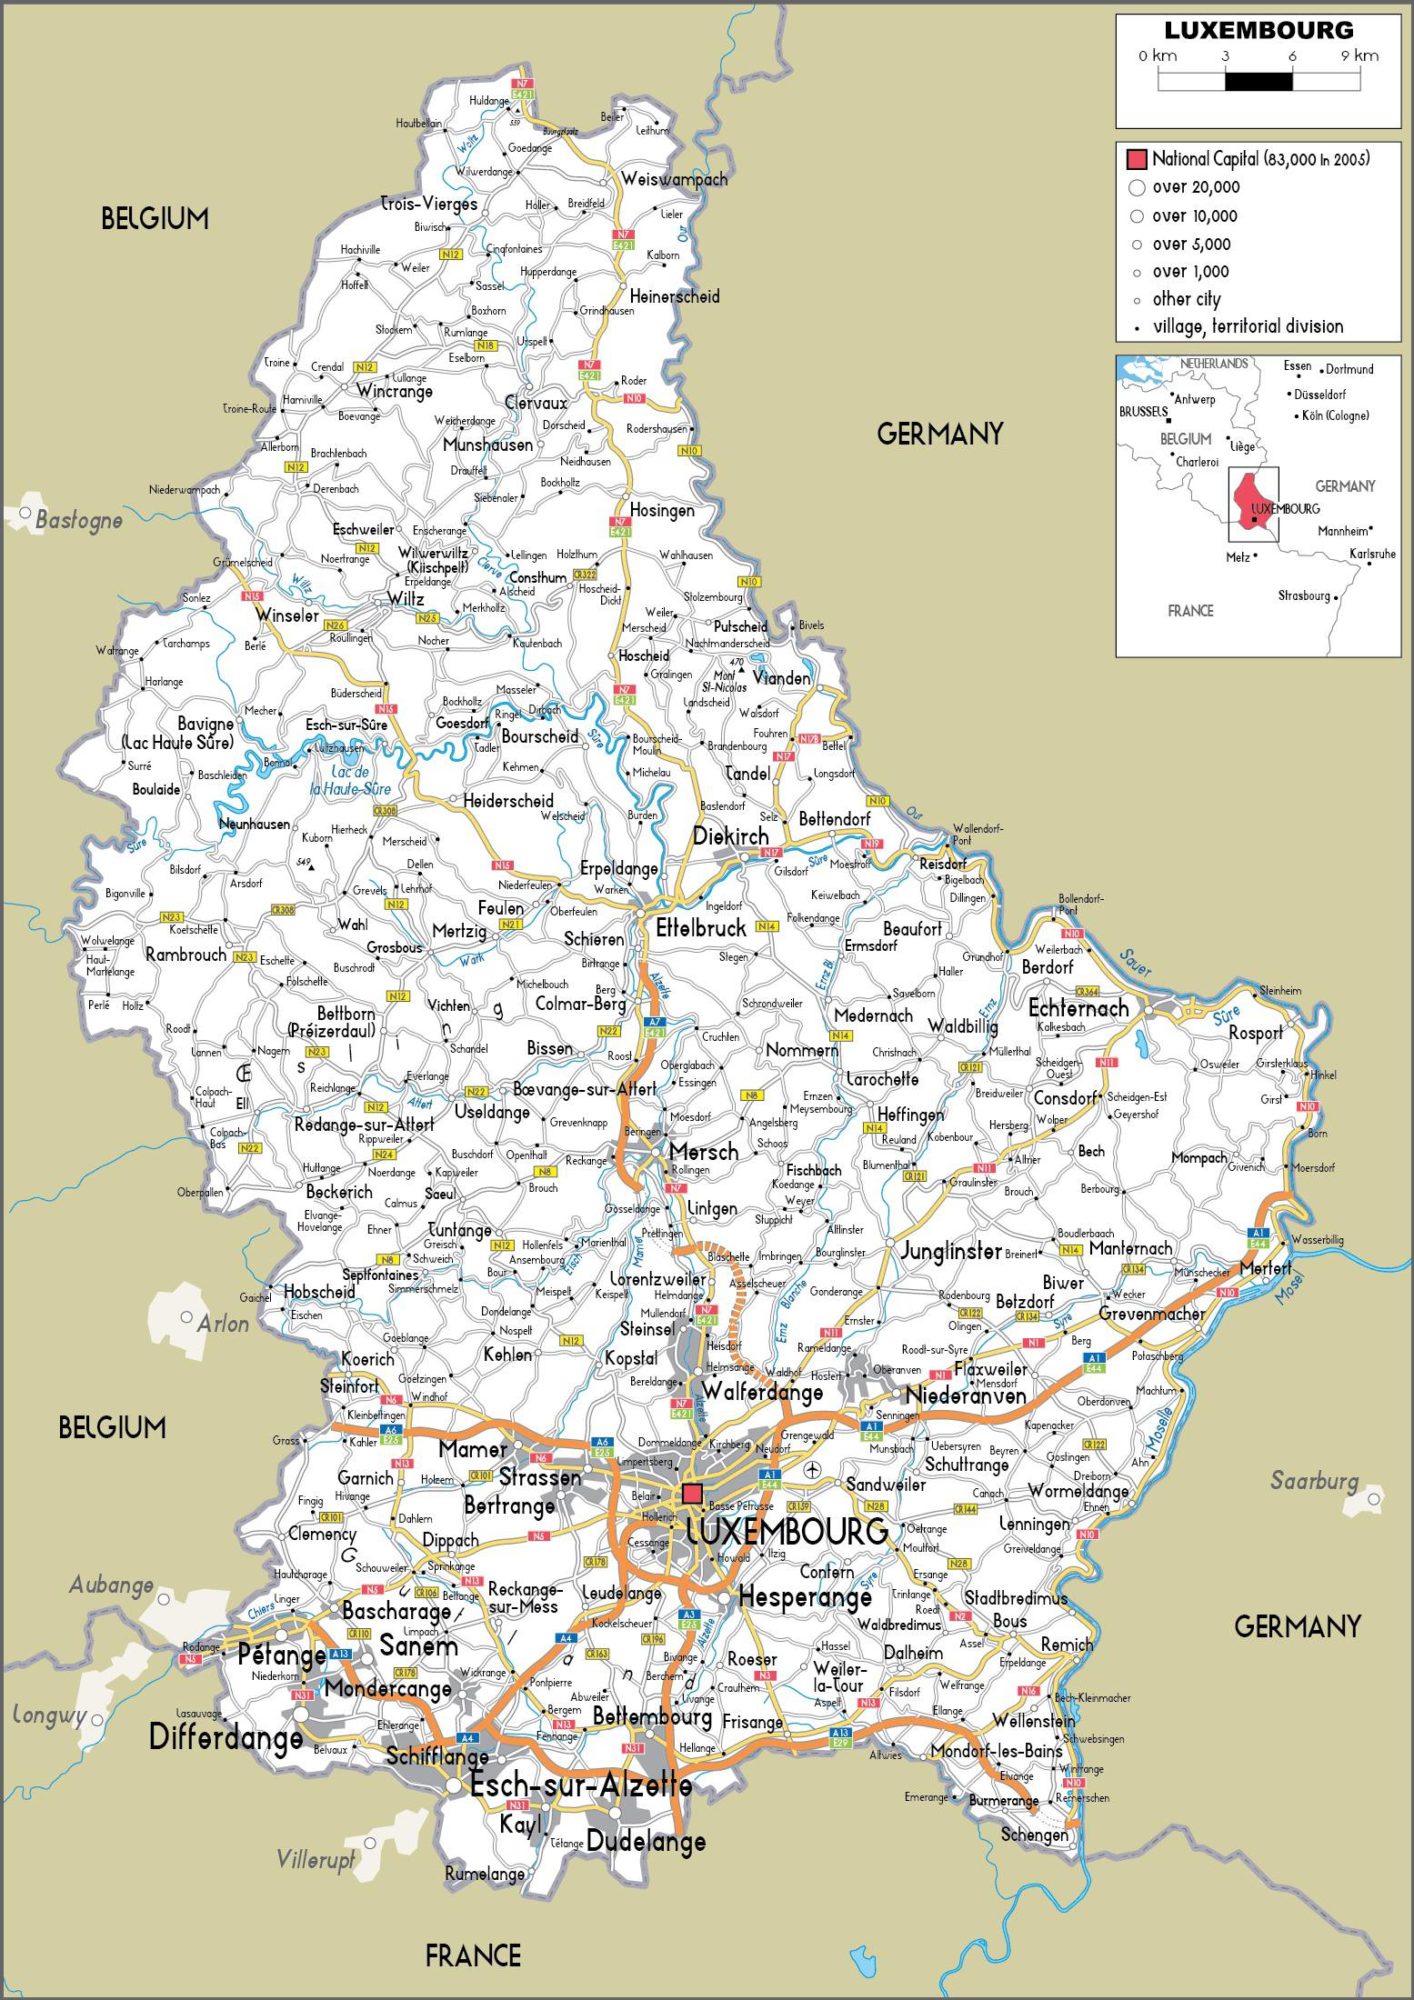 HD Map of Luxembourg